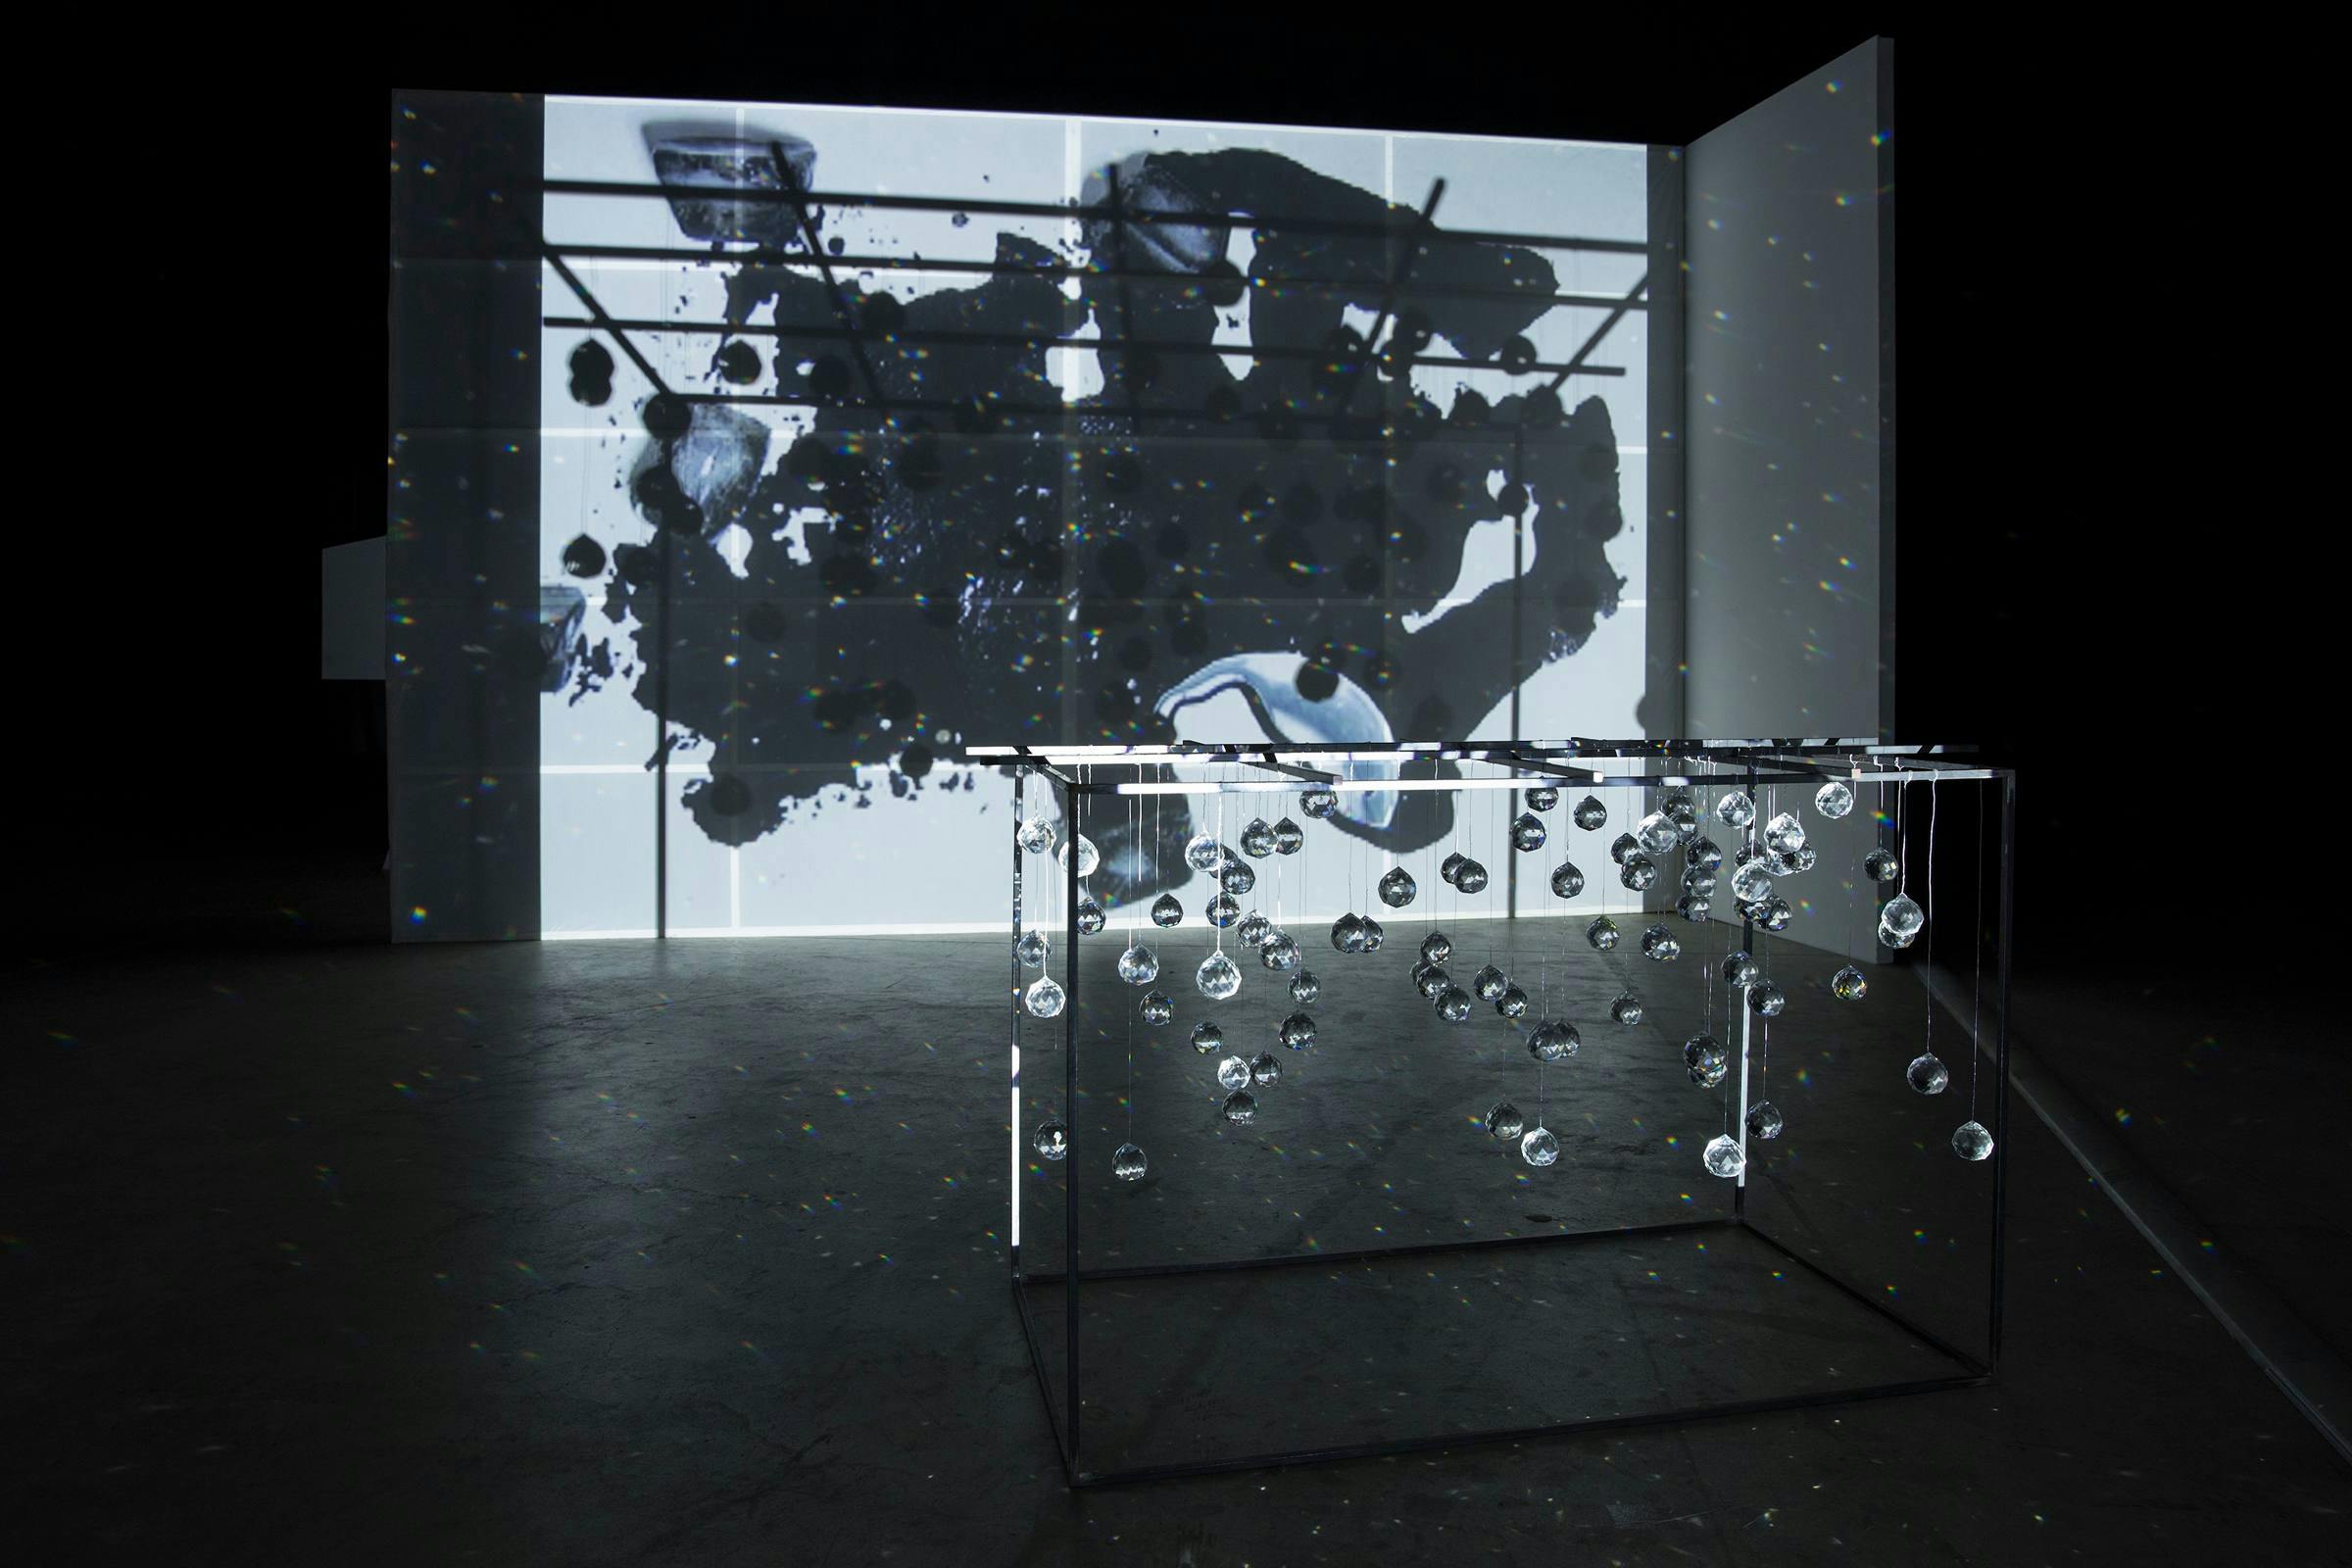 an installation view of Joan Jonas, Ice Drawing Sculpture. There is a projection of melted ice cubes and black ink in the background and a metal open cube structure with glass spheres hanging from it in the foreground